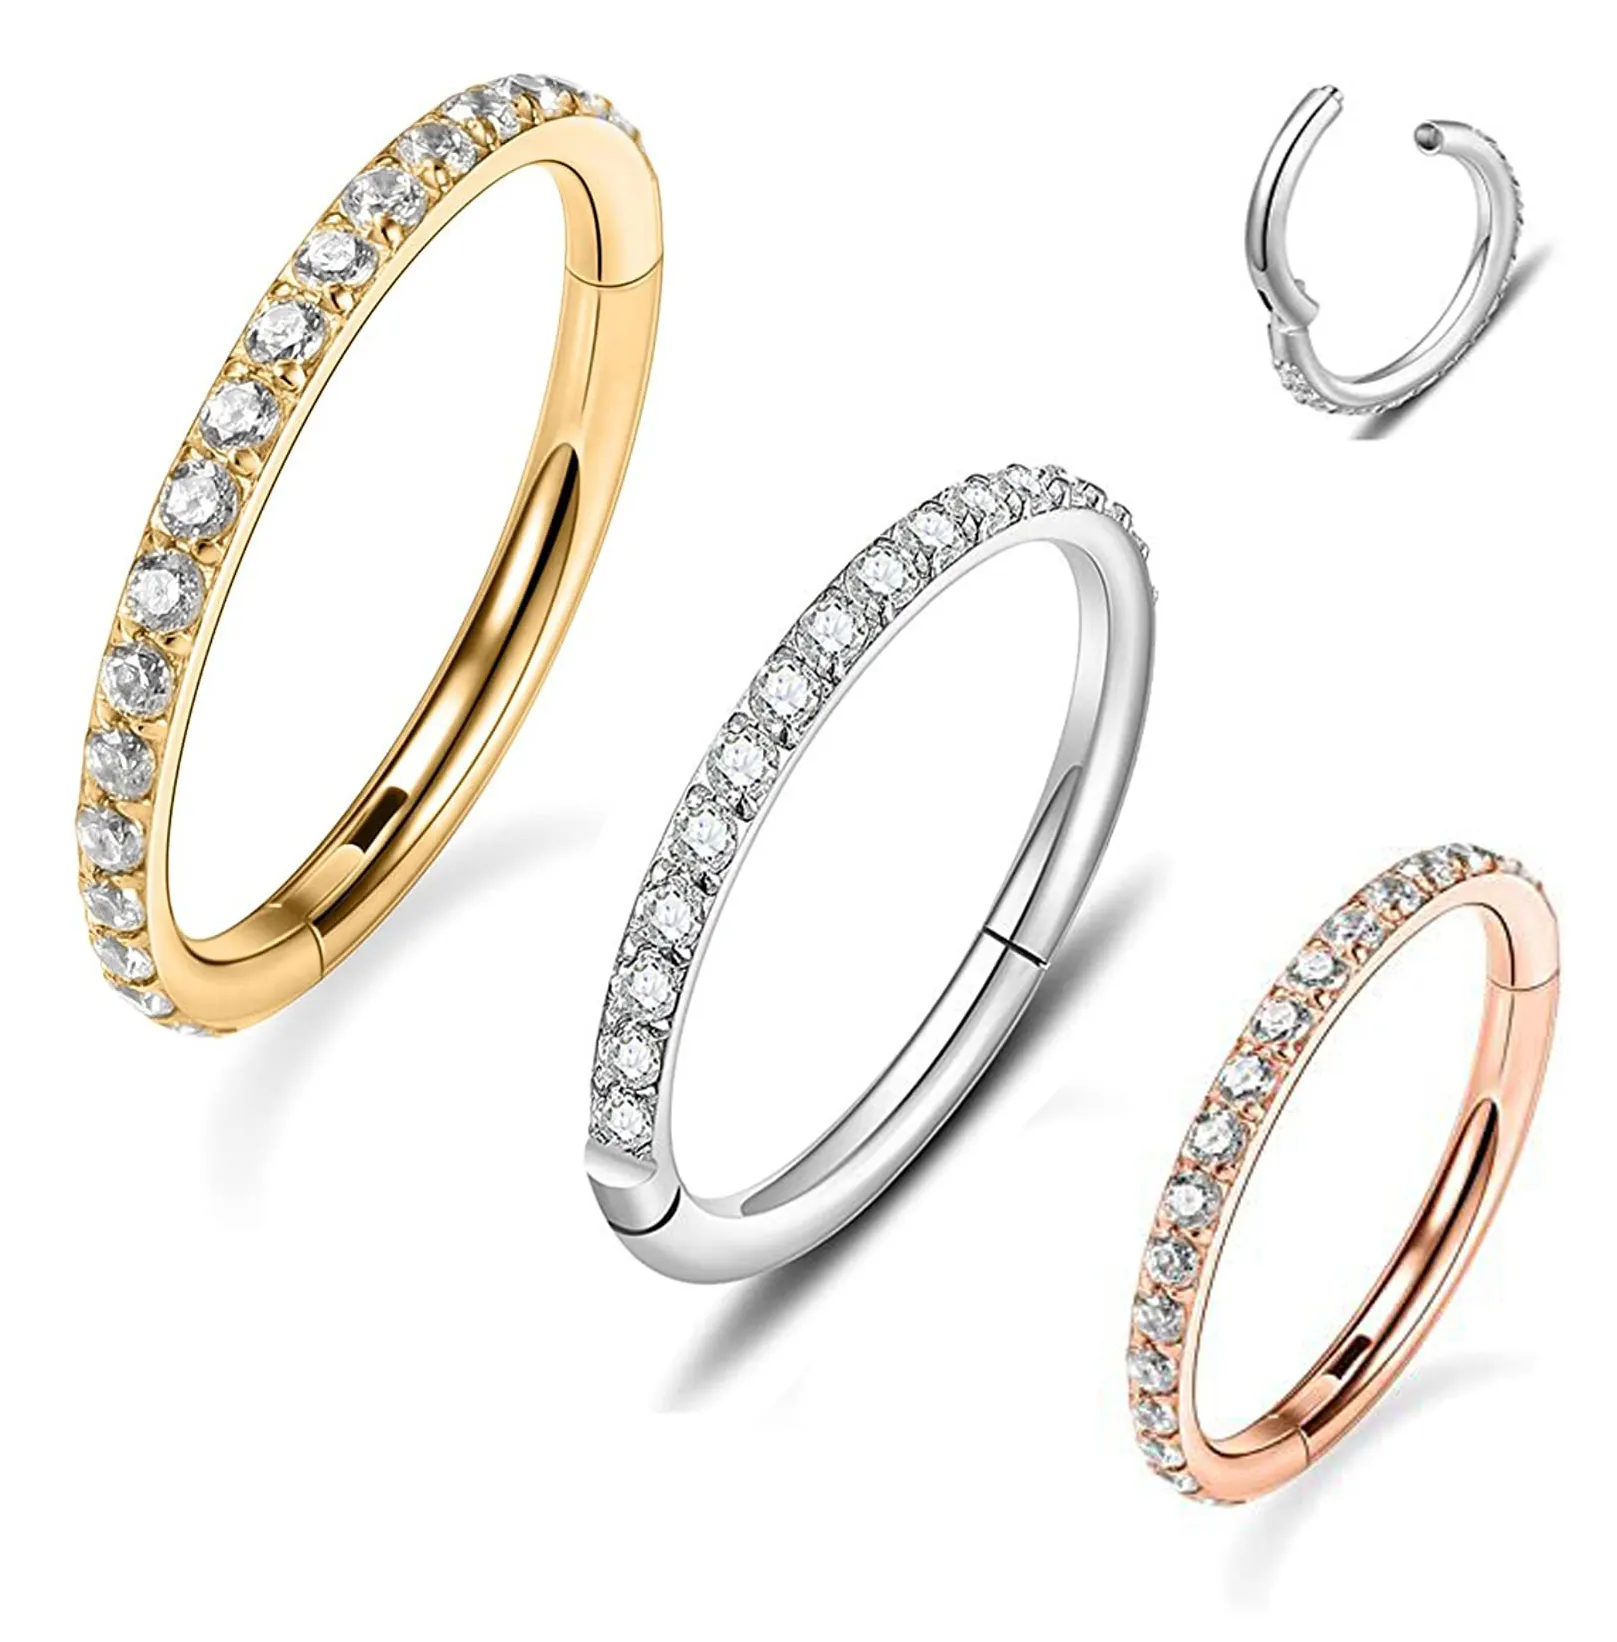 Hot selling 18k gold plated titanium hoop steel piercing jewelry nose ring for men women